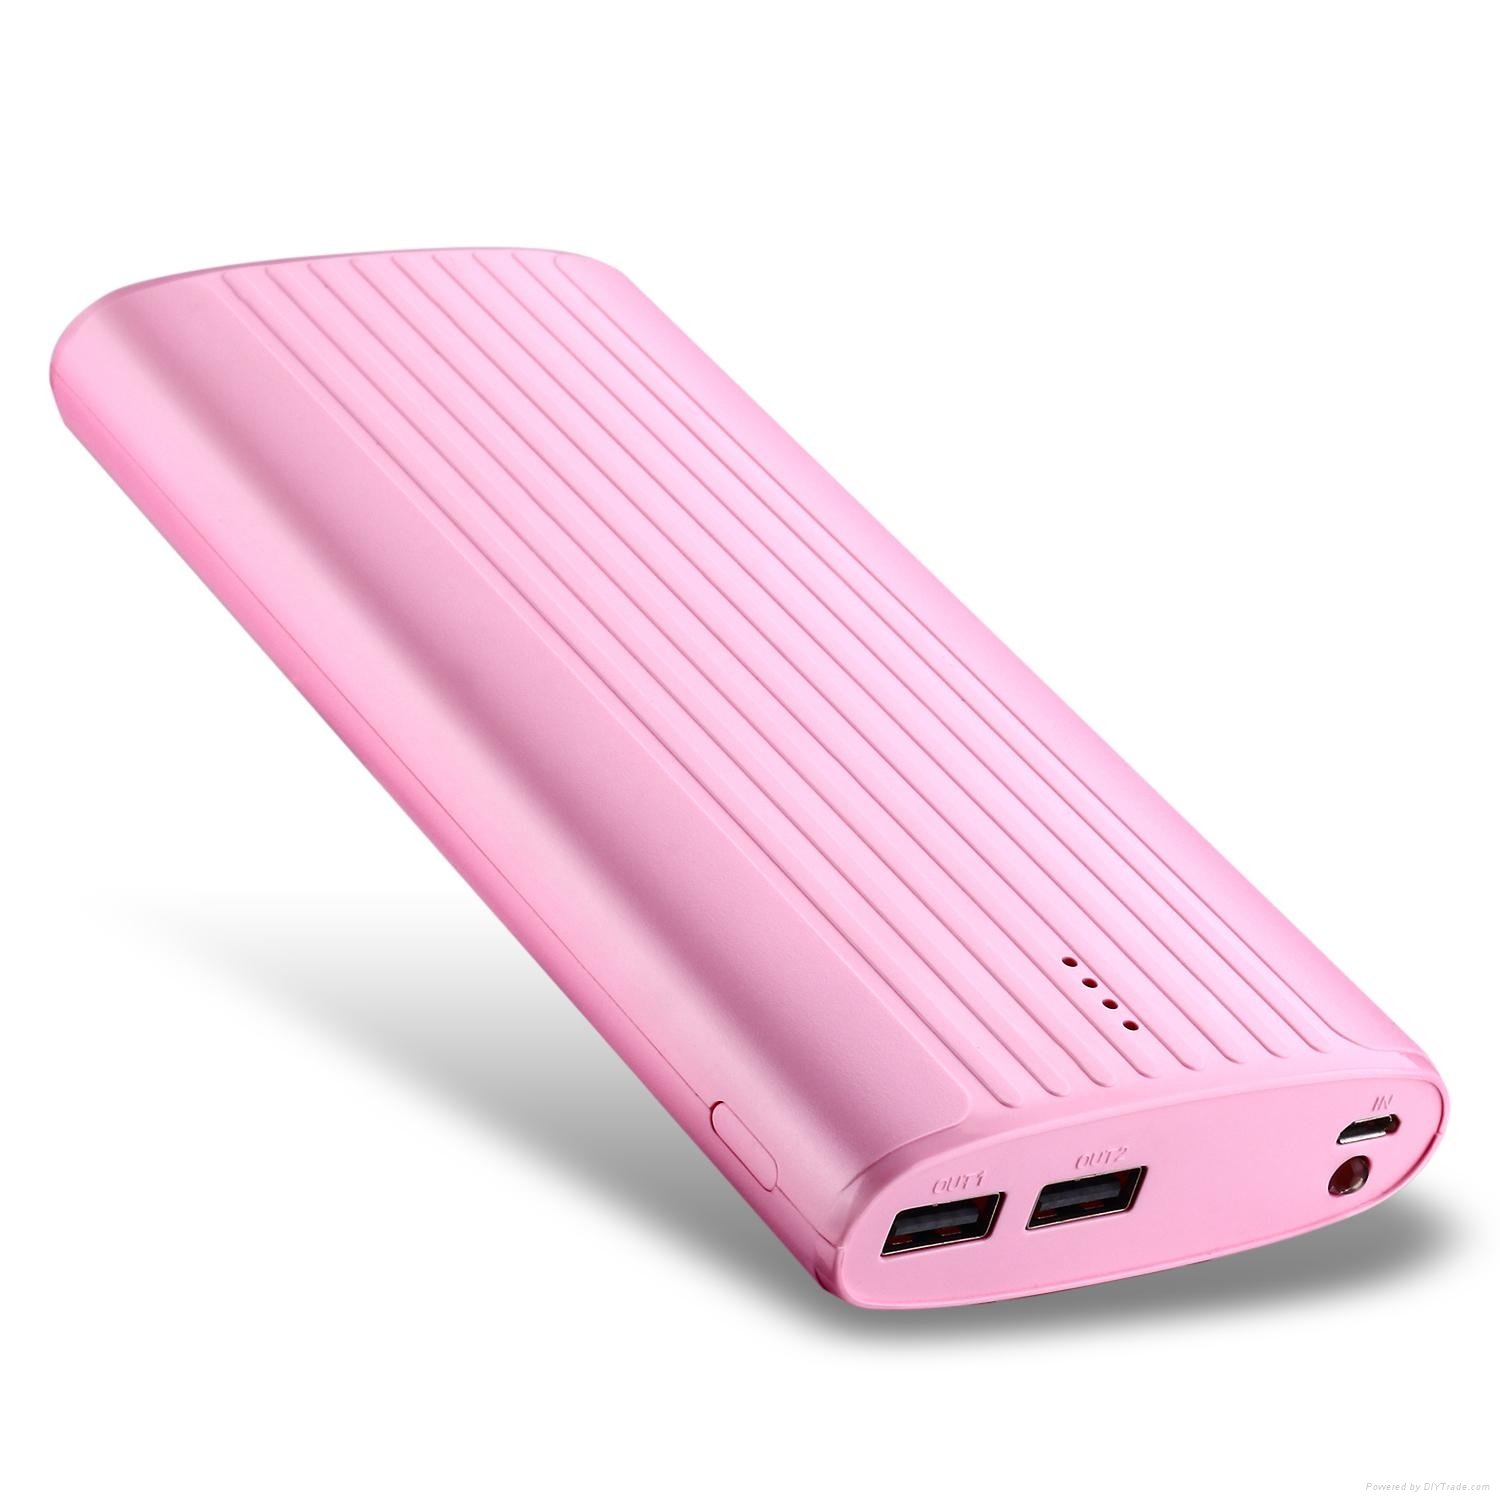 Dual ports power bank charger for iPhone6 2